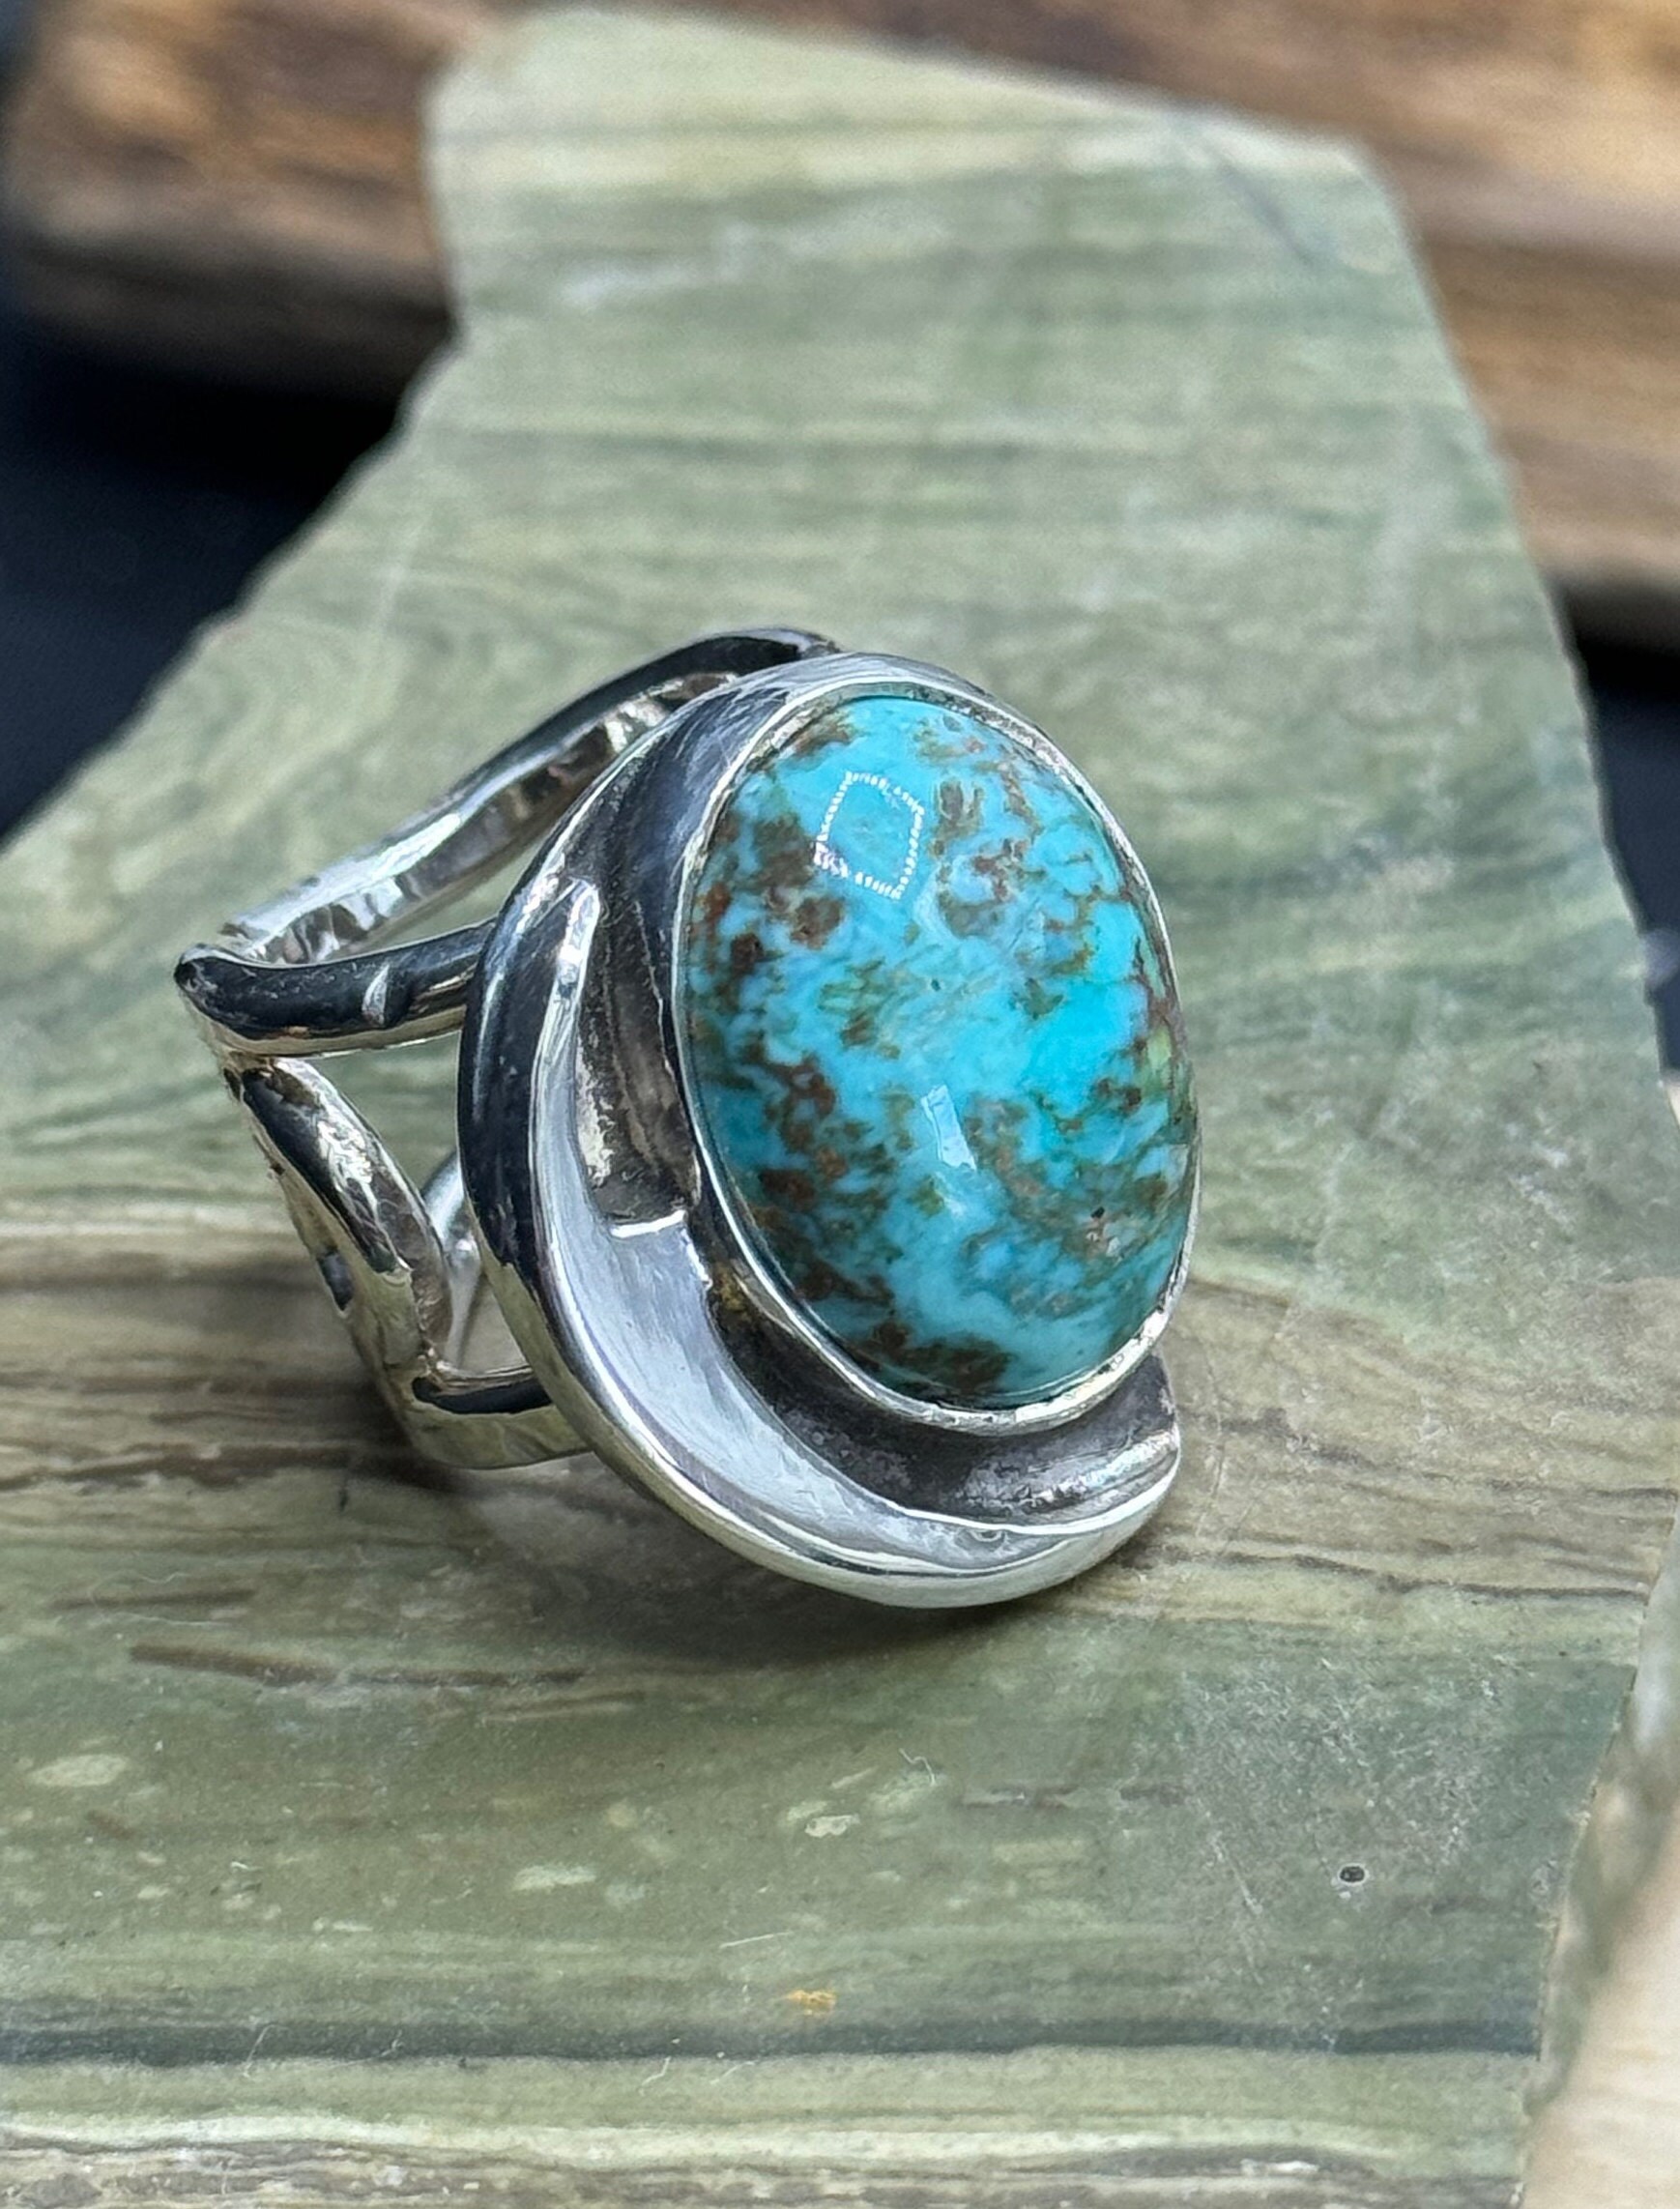 Buy Turquoise Men's Ring, 925 Sterling Silver, AAA Quality Turquoise Ring, Statement  Ring, Handmade Band,personalized Gift,14k Gold Over Online in India - Etsy